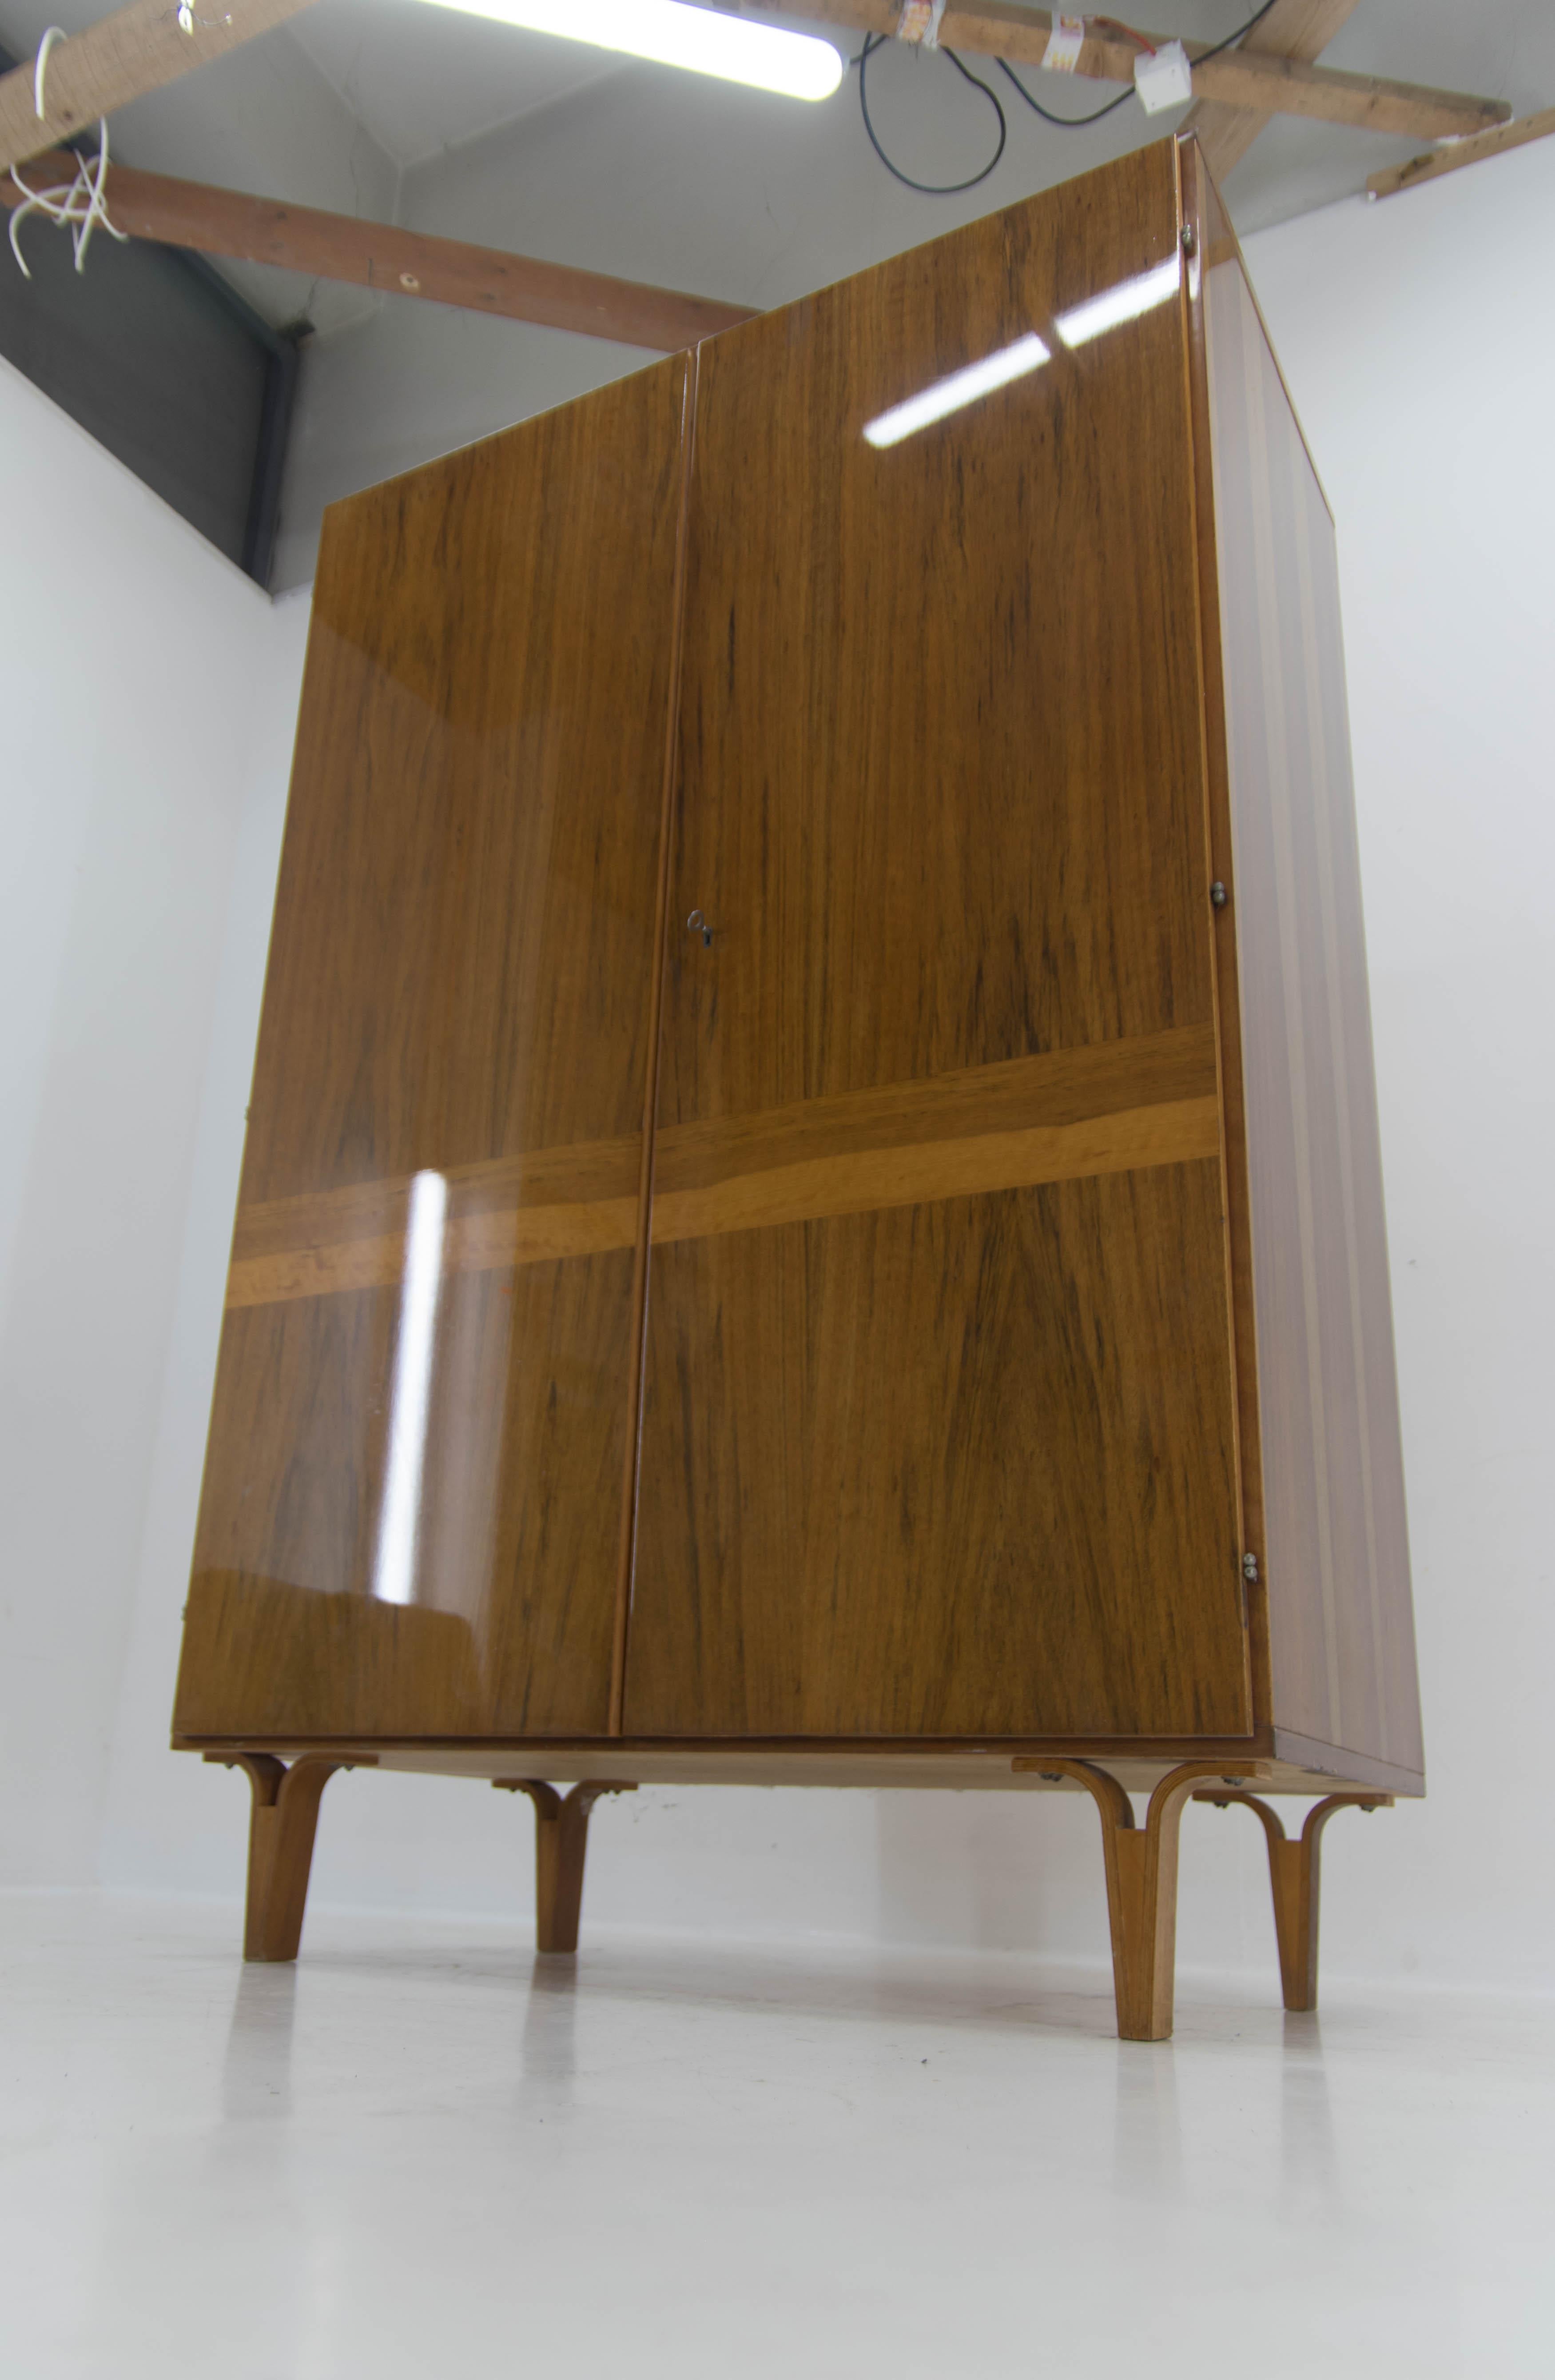 Design Mid-century wardrobe with mirror inside designed by Frantisek Mezulanik and executed and labeled by Novy Domov in Czechoslovakia in 1974.
Elegant design legs made of plywood.
Veneer with high gloss finish in perfect condition.
Cleaned and